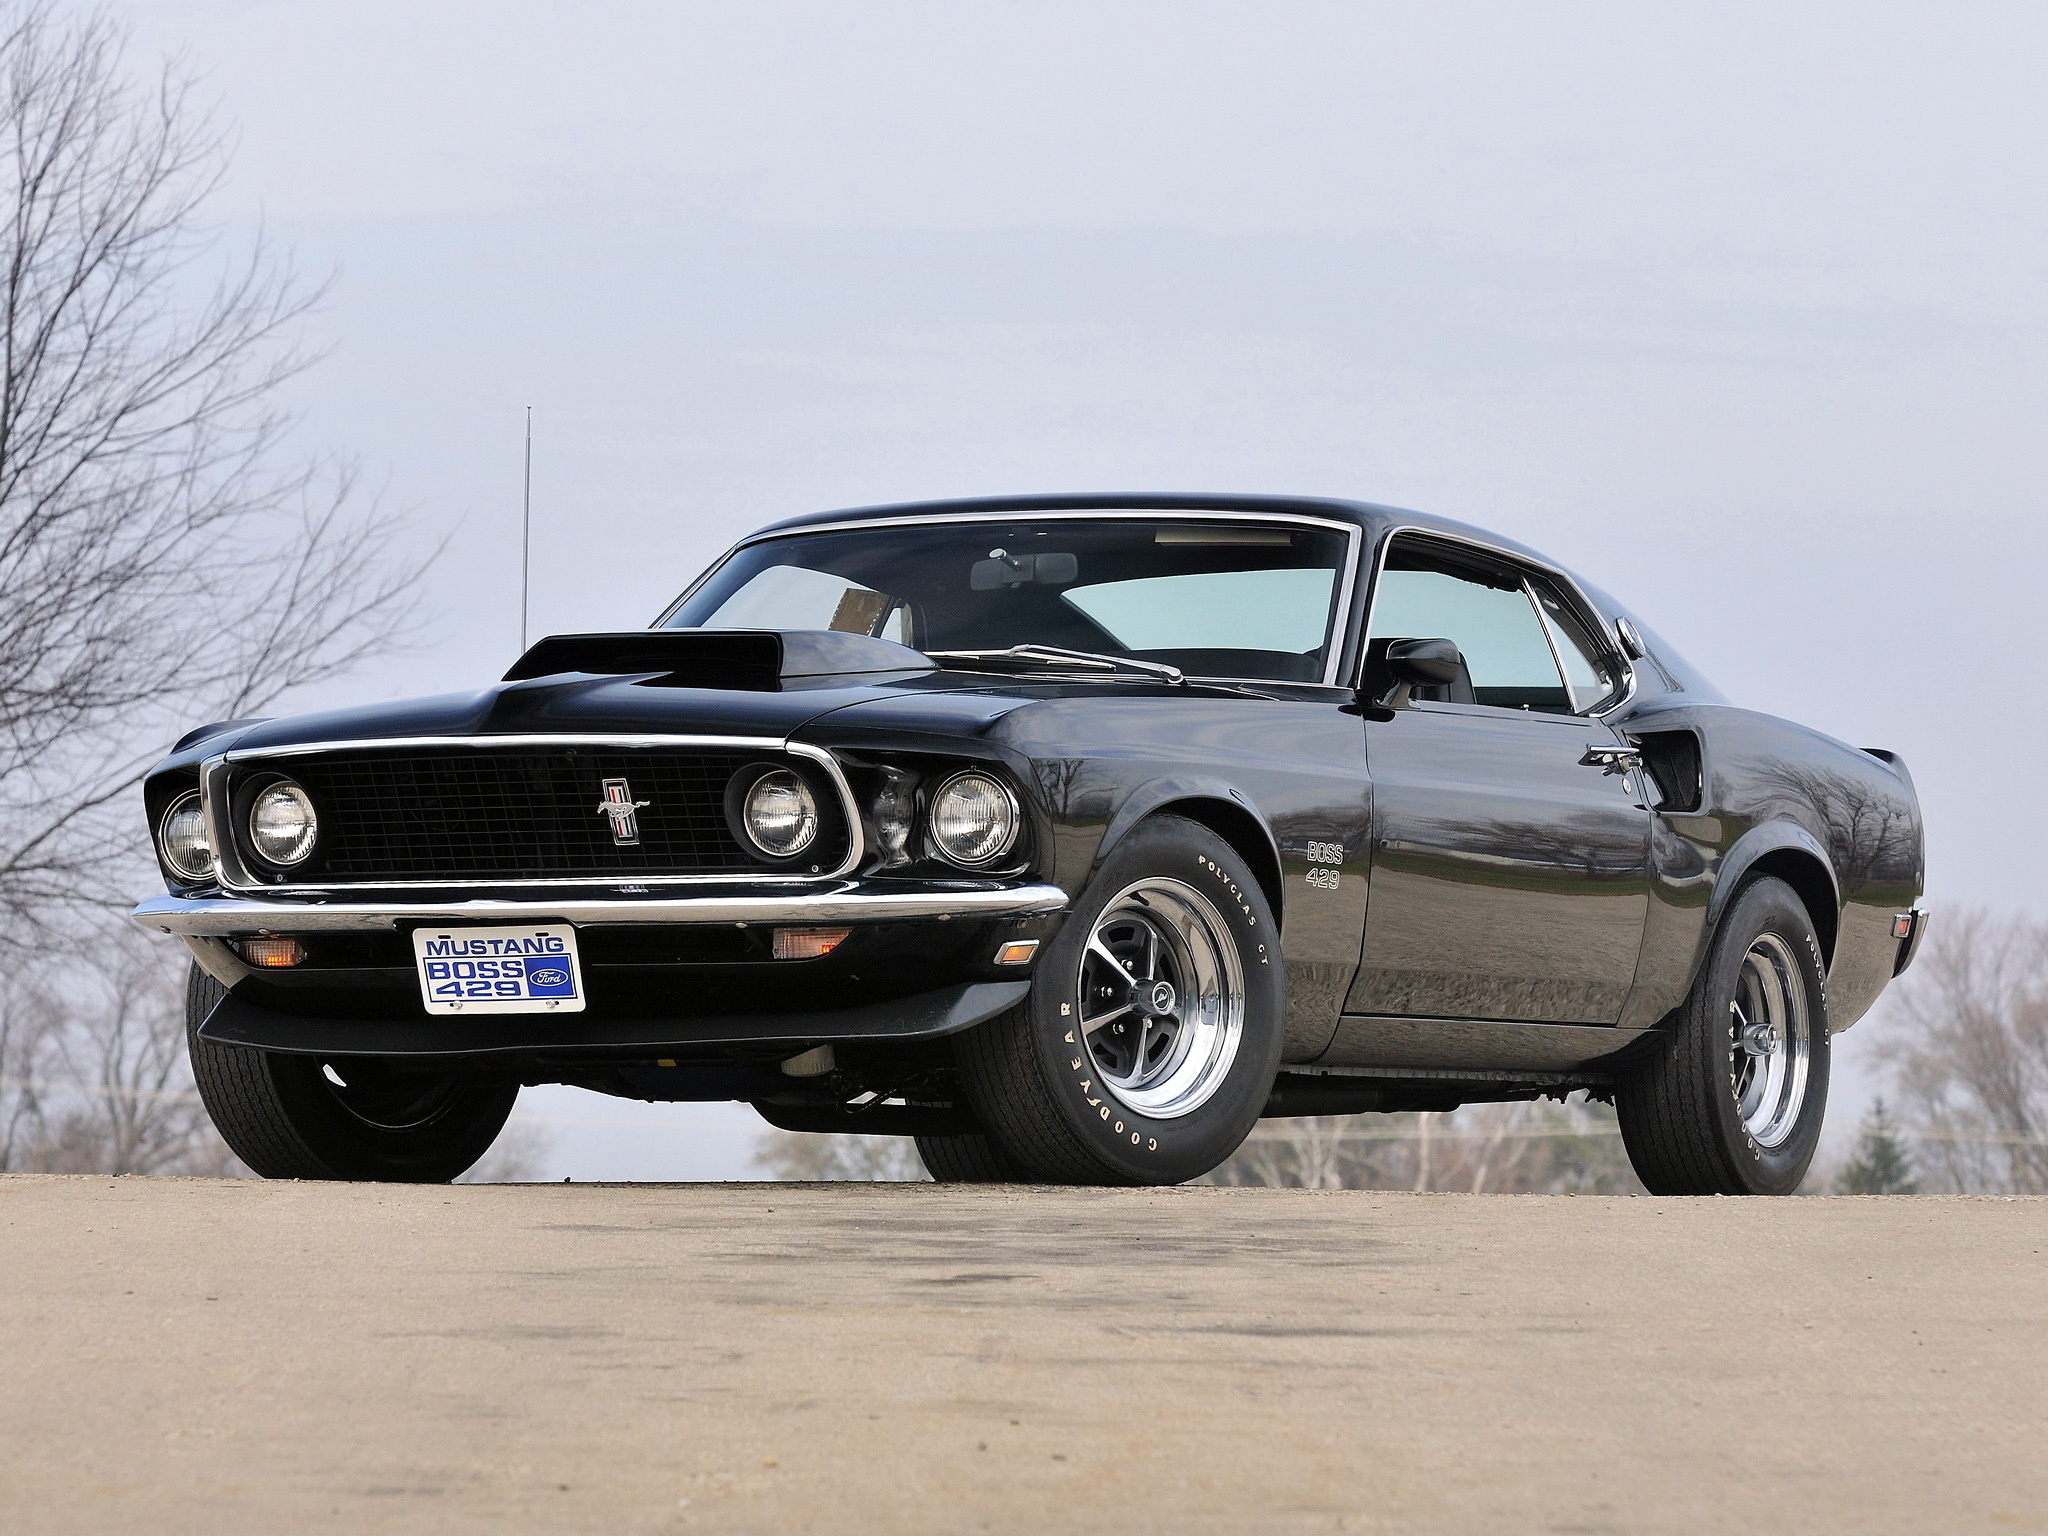 mustang, muscle car, 429, 1969, ford, cars, black, boss